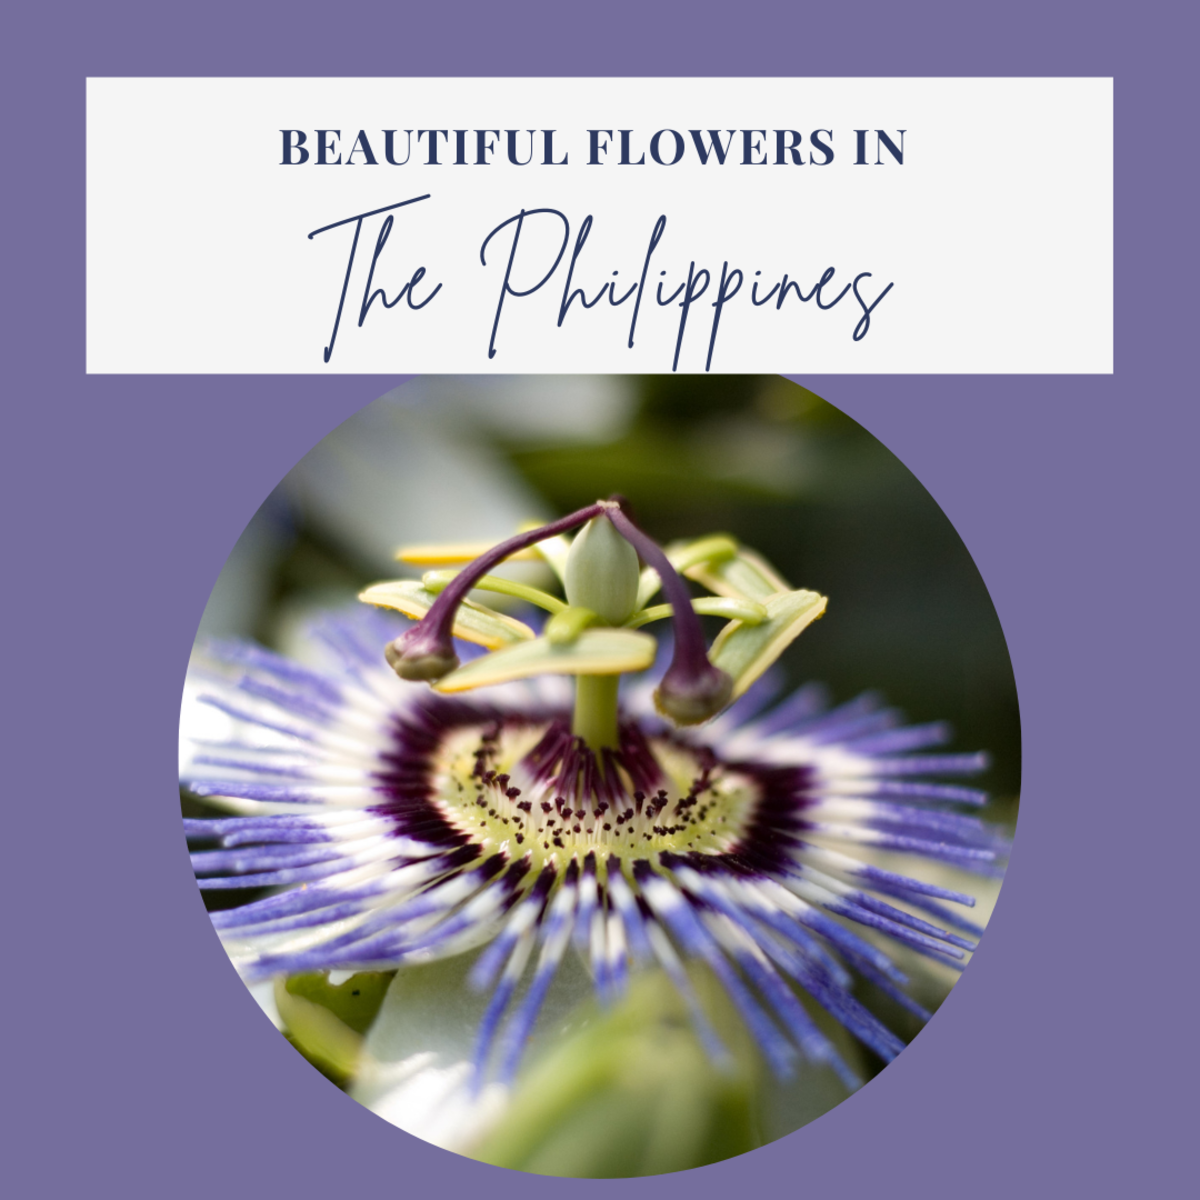 Here are 20 of the most beautiful flowers in the Philippines.